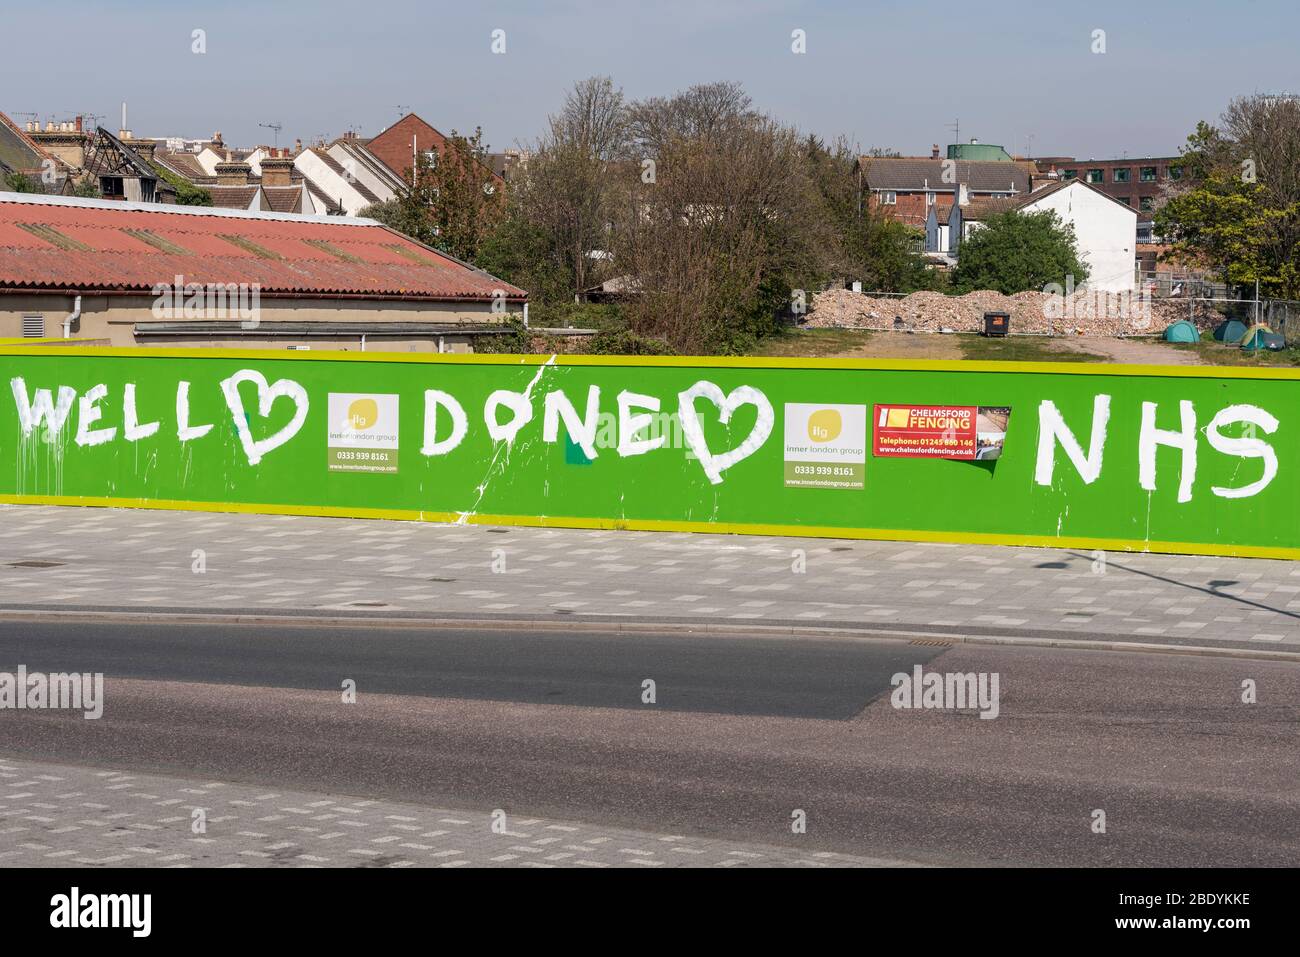 Well done NHS painted message on sunny day on Southend on Sea seafront on Good Friday of Easter during COVID-19 Coronavirus pandemic lockdown period Stock Photo